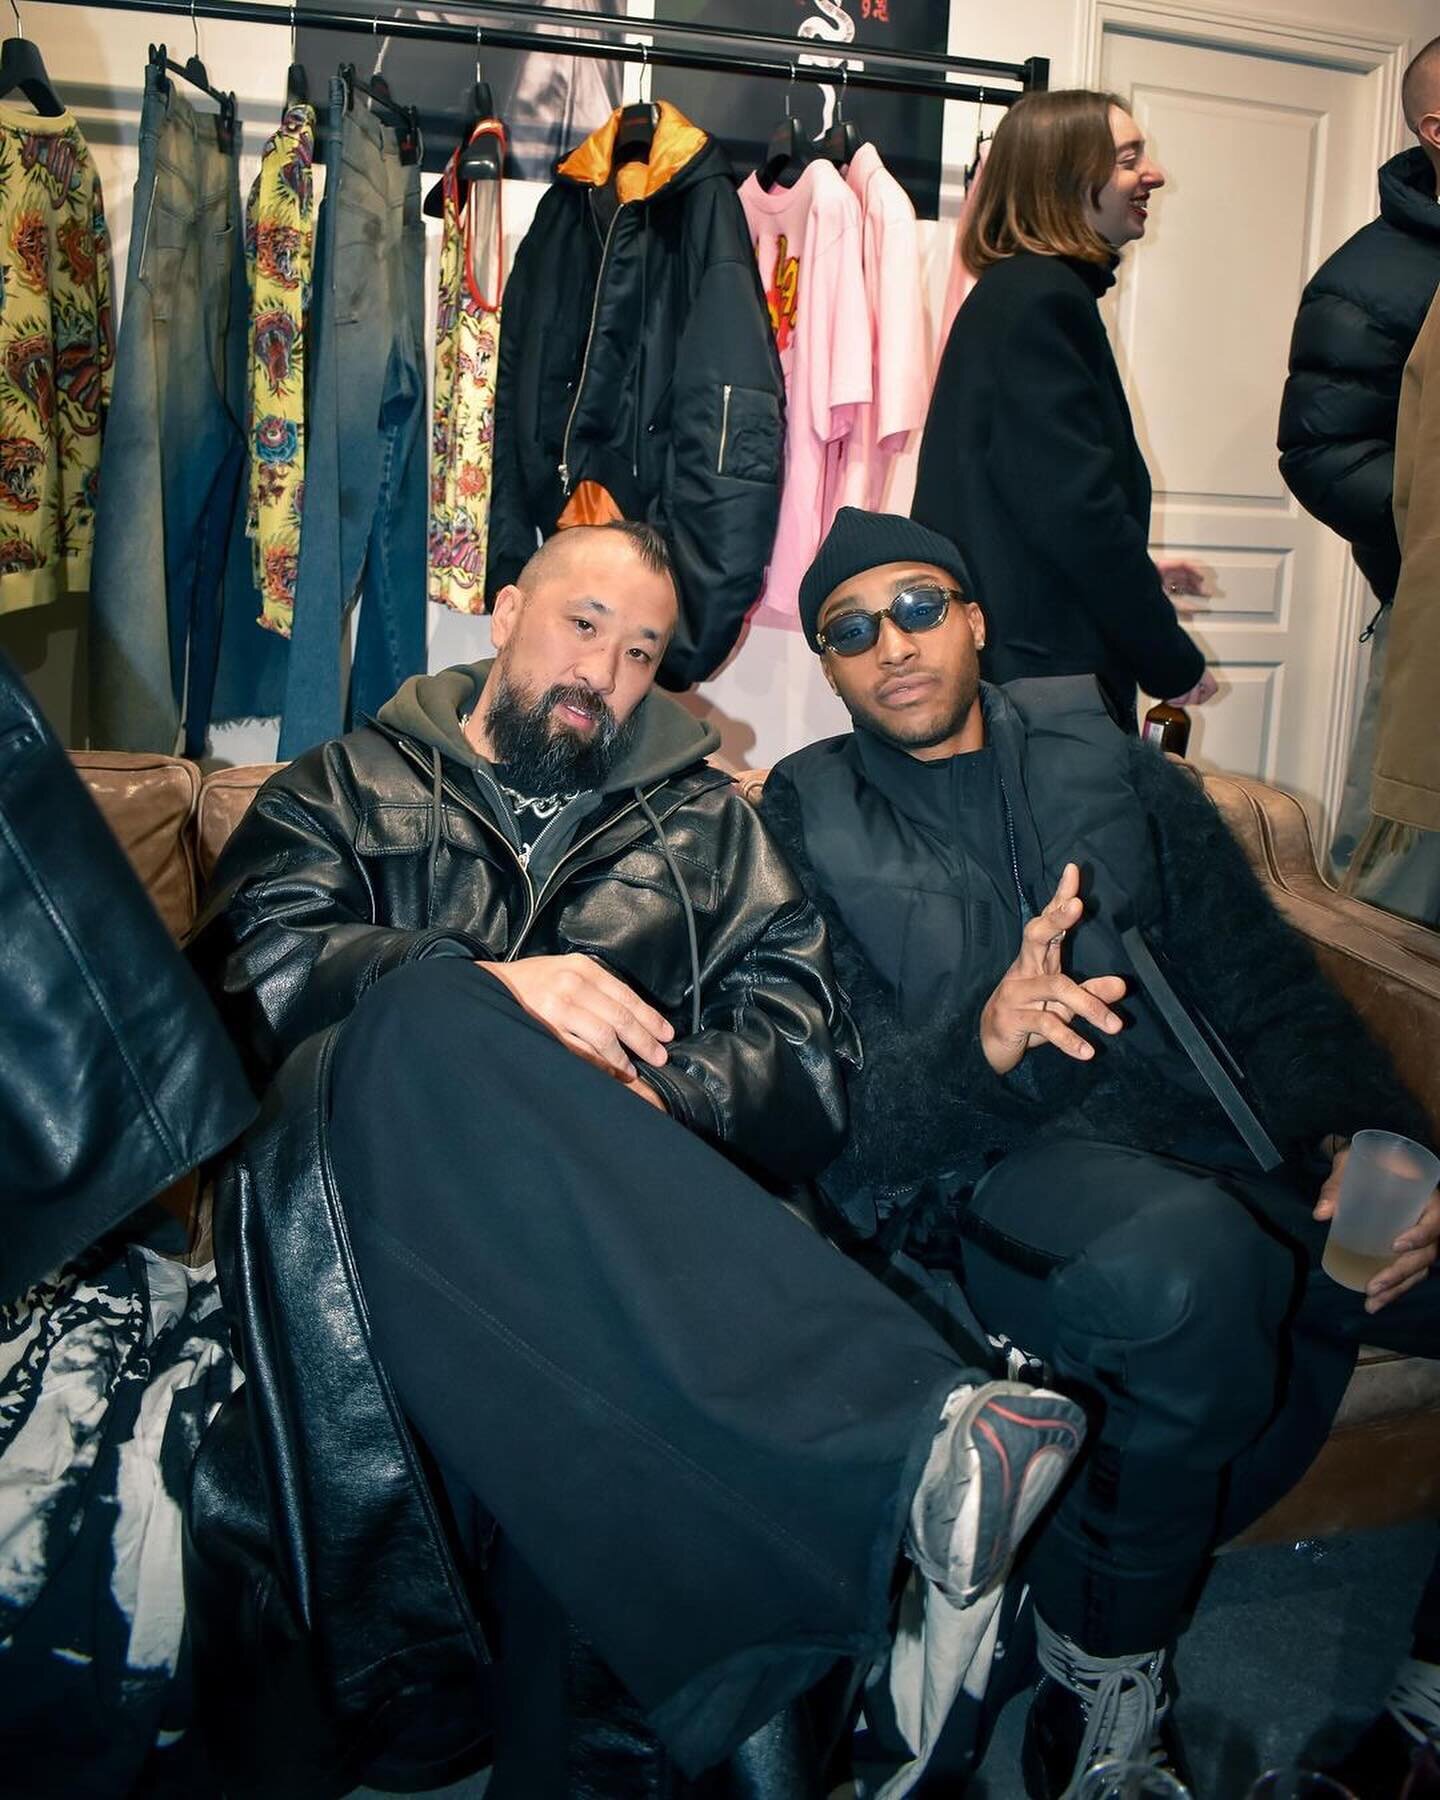 &lsquo;Umi say, mamasa mamakusa&hellip;&rsquo; That&rsquo;s French for &quot;Ooo wee!&quot; (@westsidegunn voice*) 😌🤌🏾⚡️✌🏾🇫🇷🌍🇨🇲 @reveriepage |

#parisfashionweek #parisfw #parisfw24 #parisfashionweek2024 #streetstyle #parisnights #parisnight